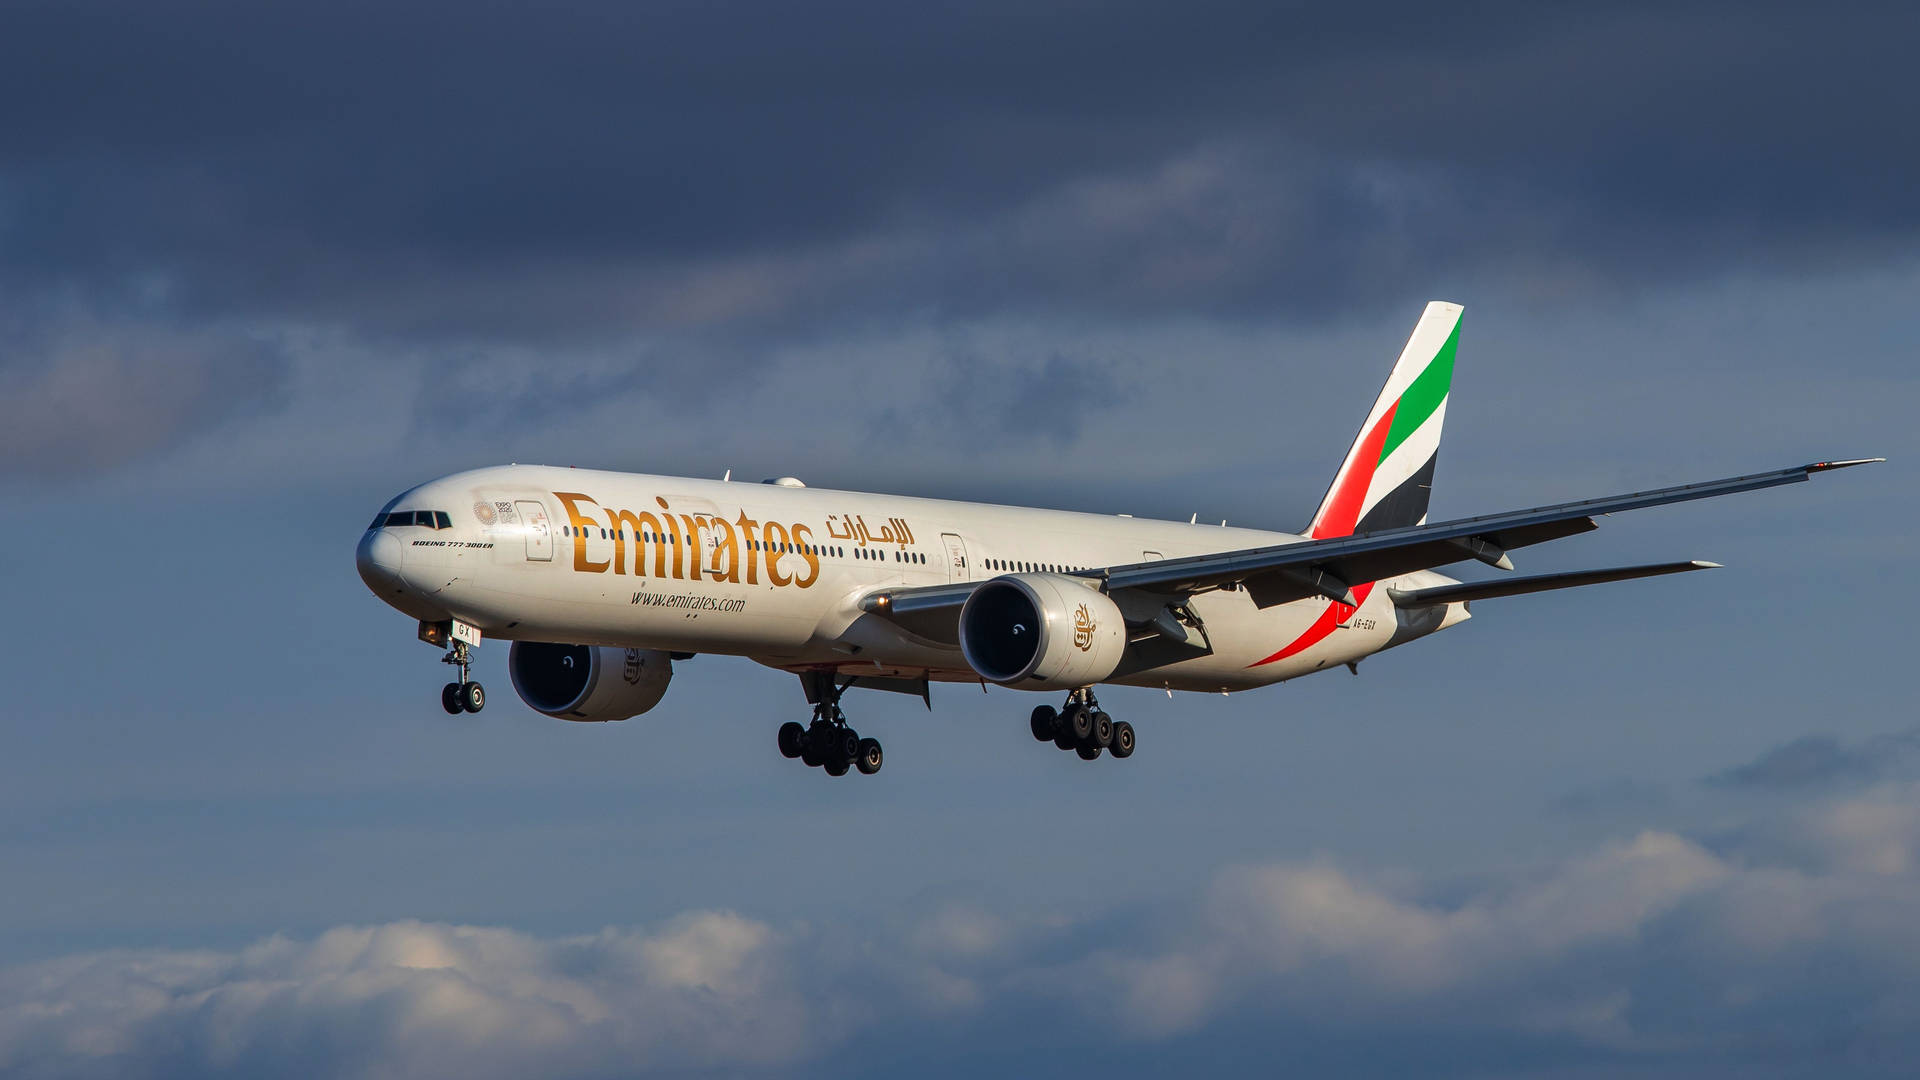 Emirates Airliner in Mid-Flight as featured on Google Flights Wallpaper